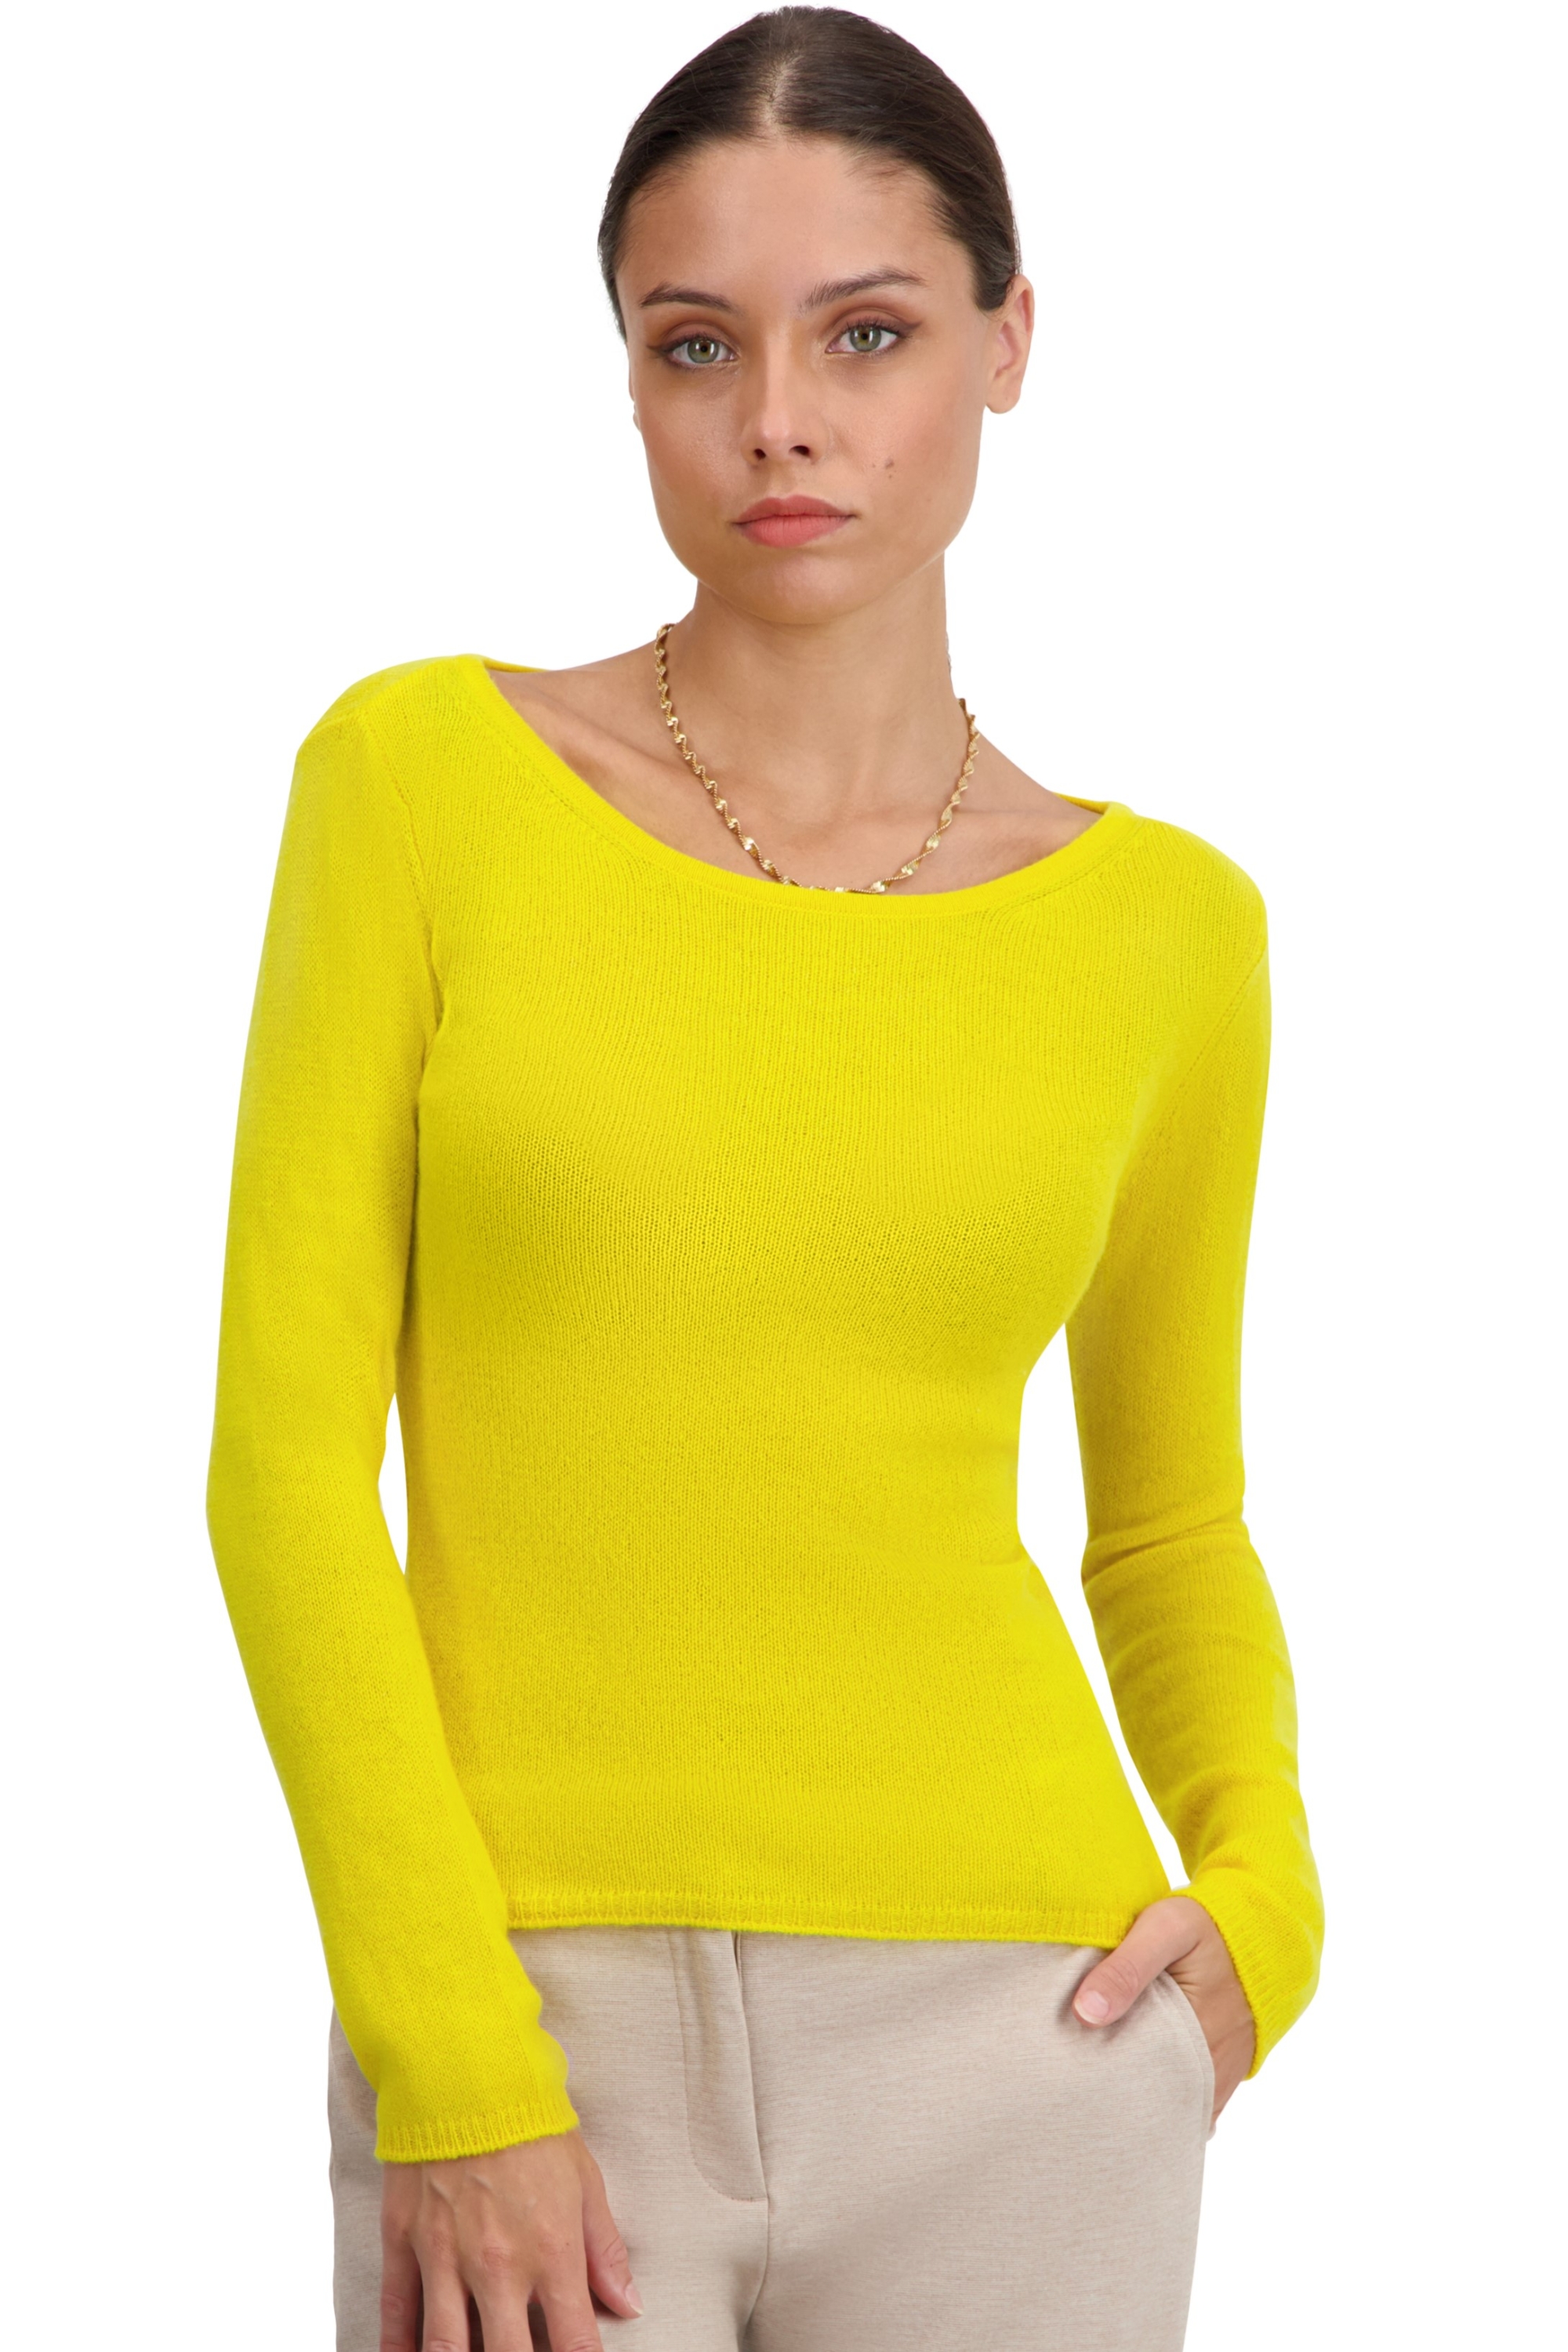 Cashmere ladies timeless classics caleen cyber yellow xs